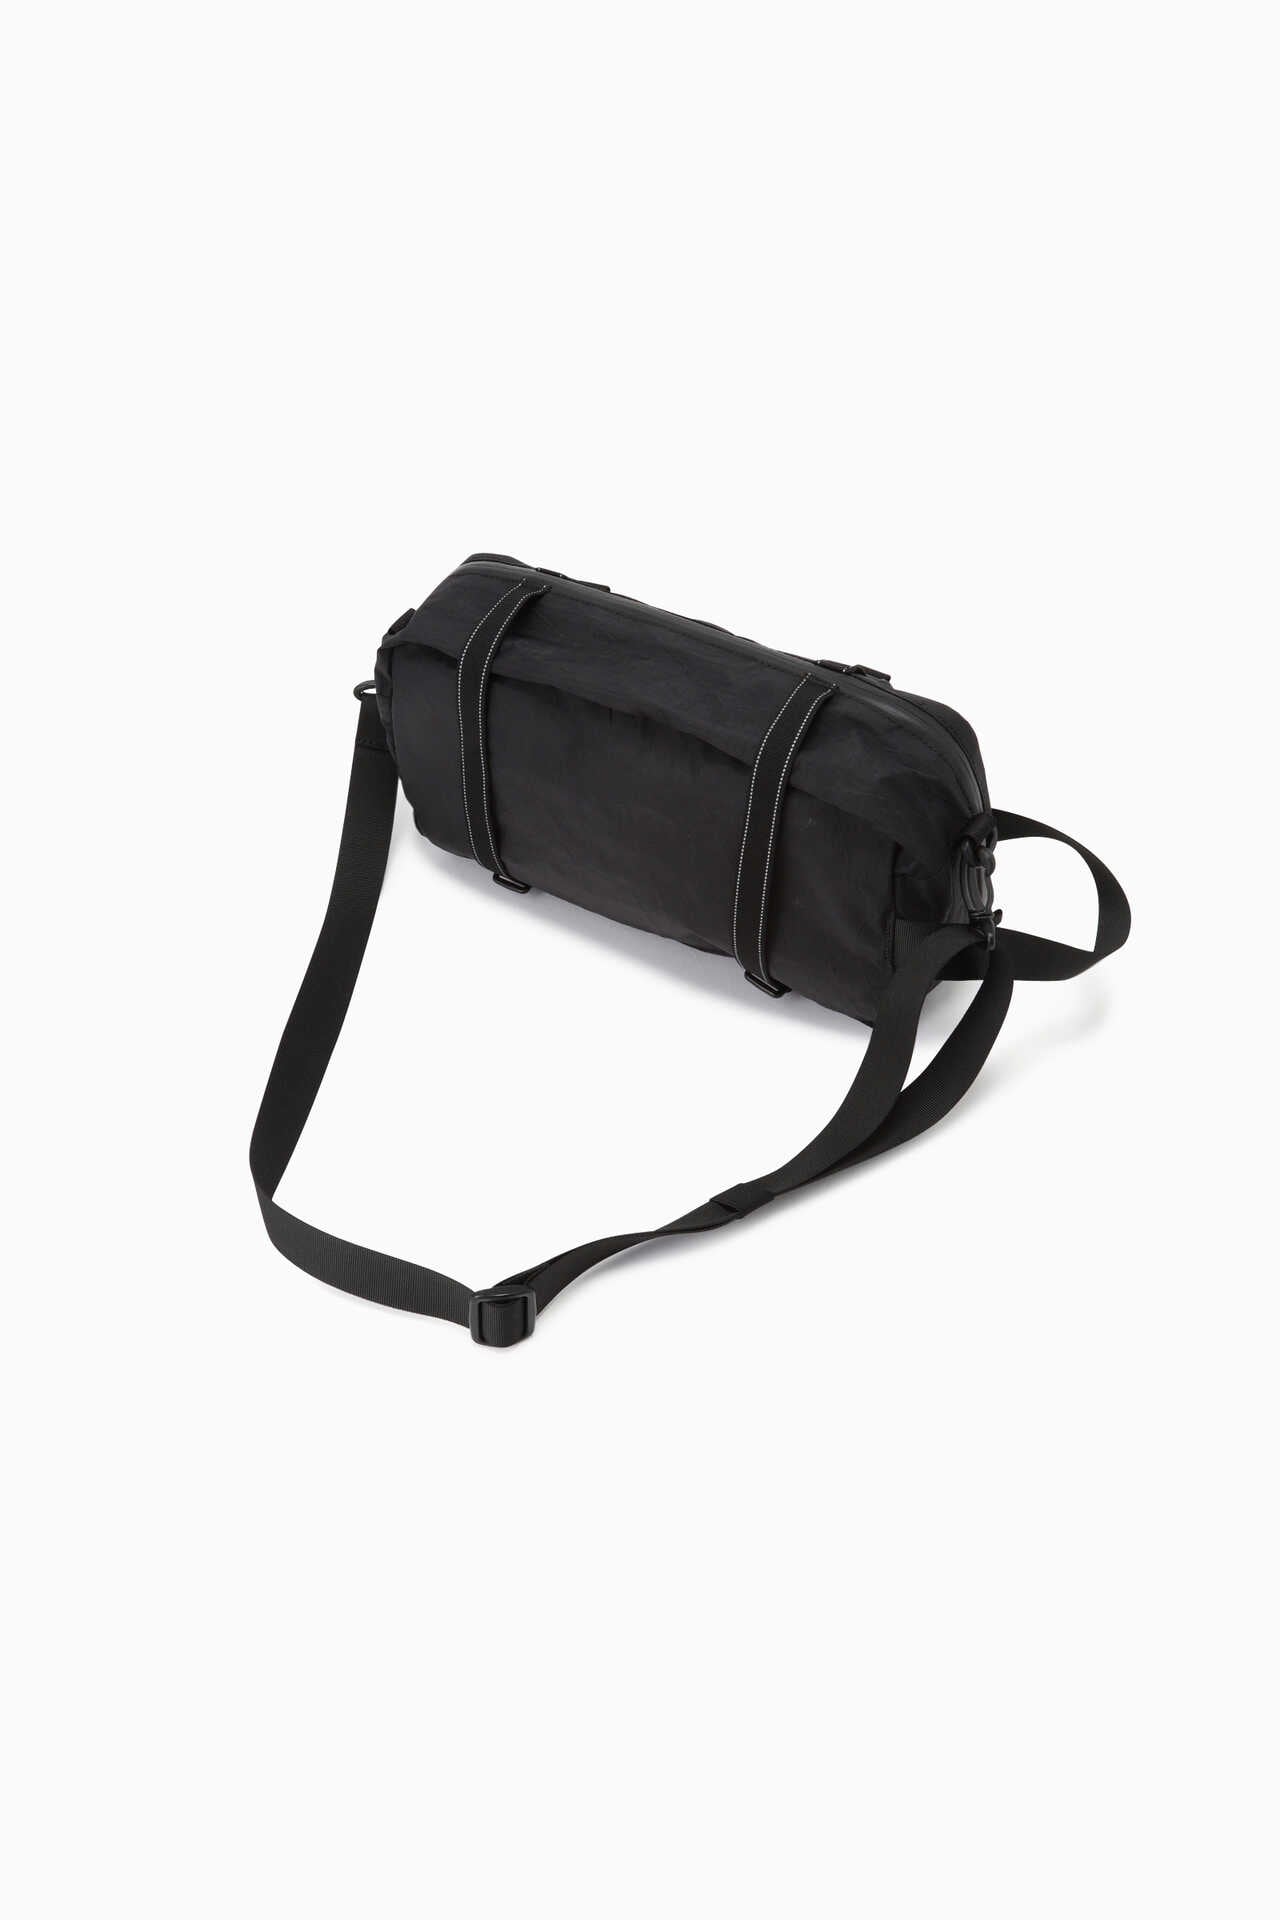 X-Pac tool bag | bags | and wander ONLINE STORE